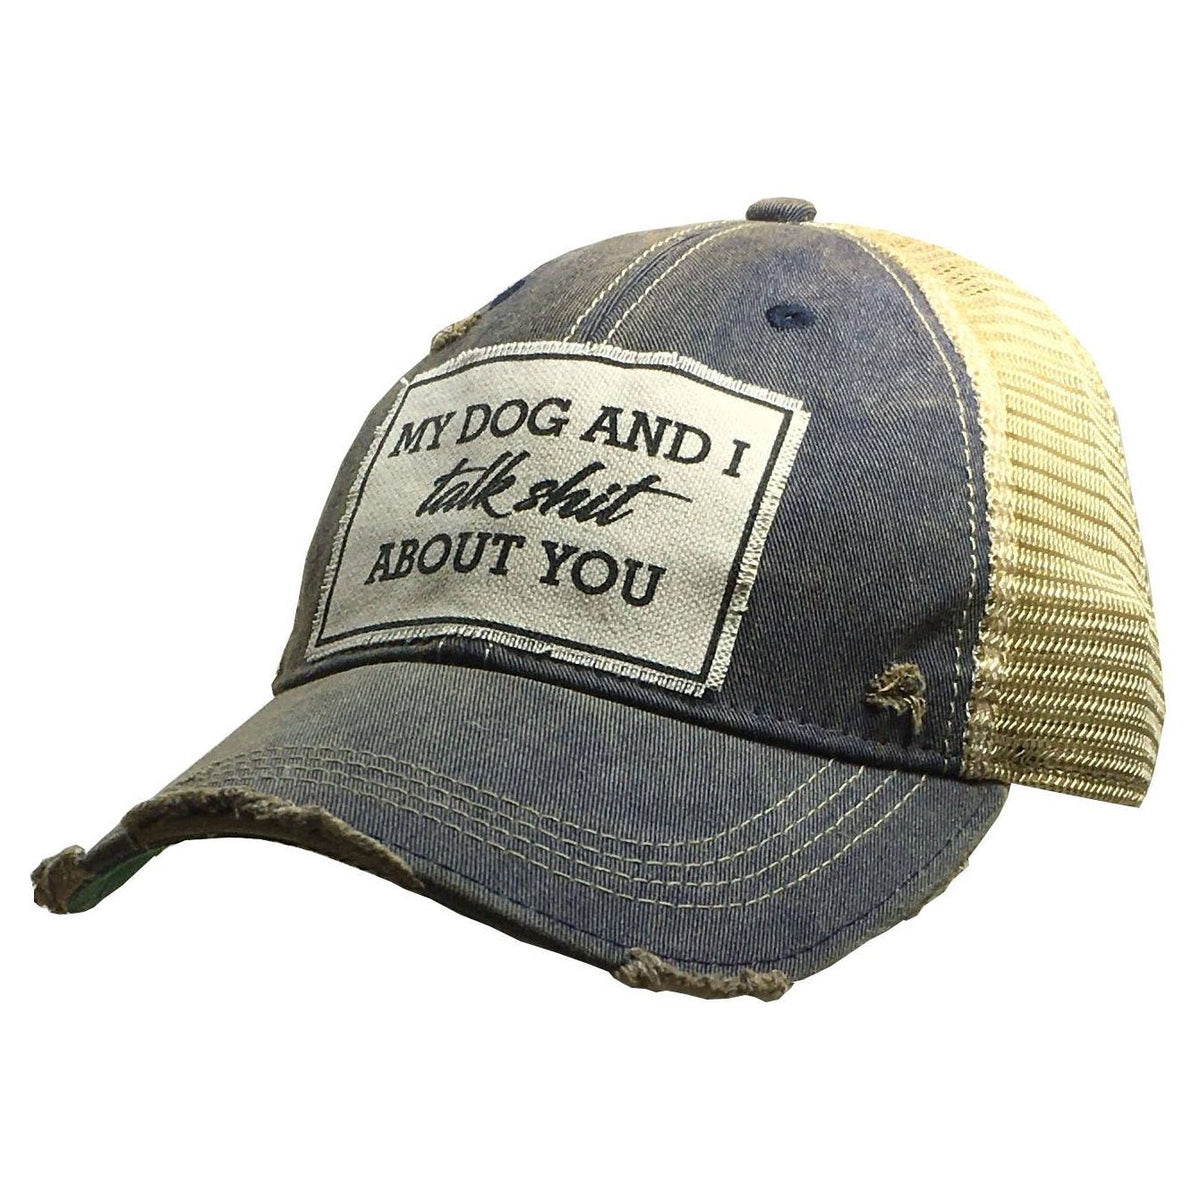 My Dog And I Talk Shit About You Trucker Hat Baseball Cap-Hats-[Womens_Boutique]-[NFR]-[Rodeo_Fashion]-[Western_Style]-Calamity's LLC